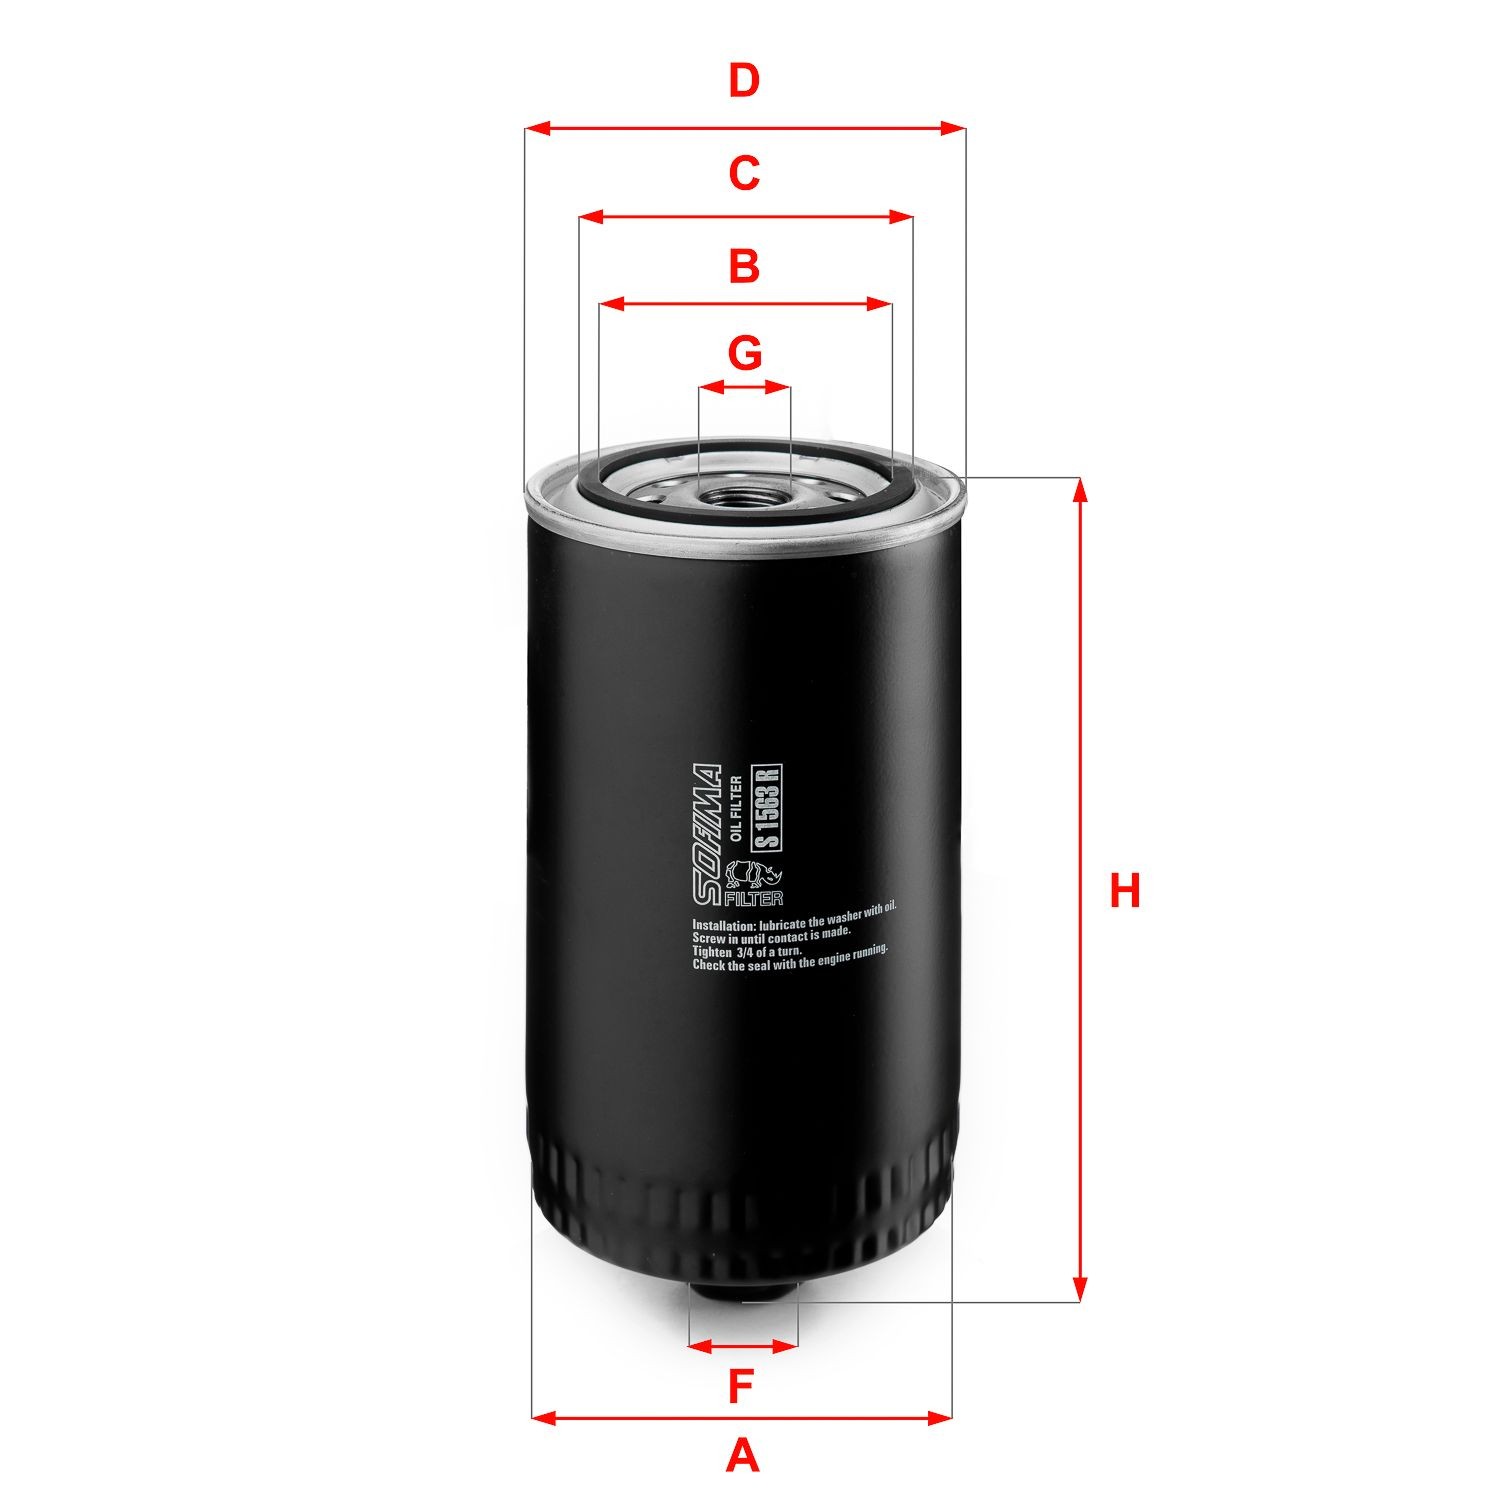 SOFIMA S 1563 R Oil filter 3/4-16 UNF, with one anti-return valve, Spin-on Filter